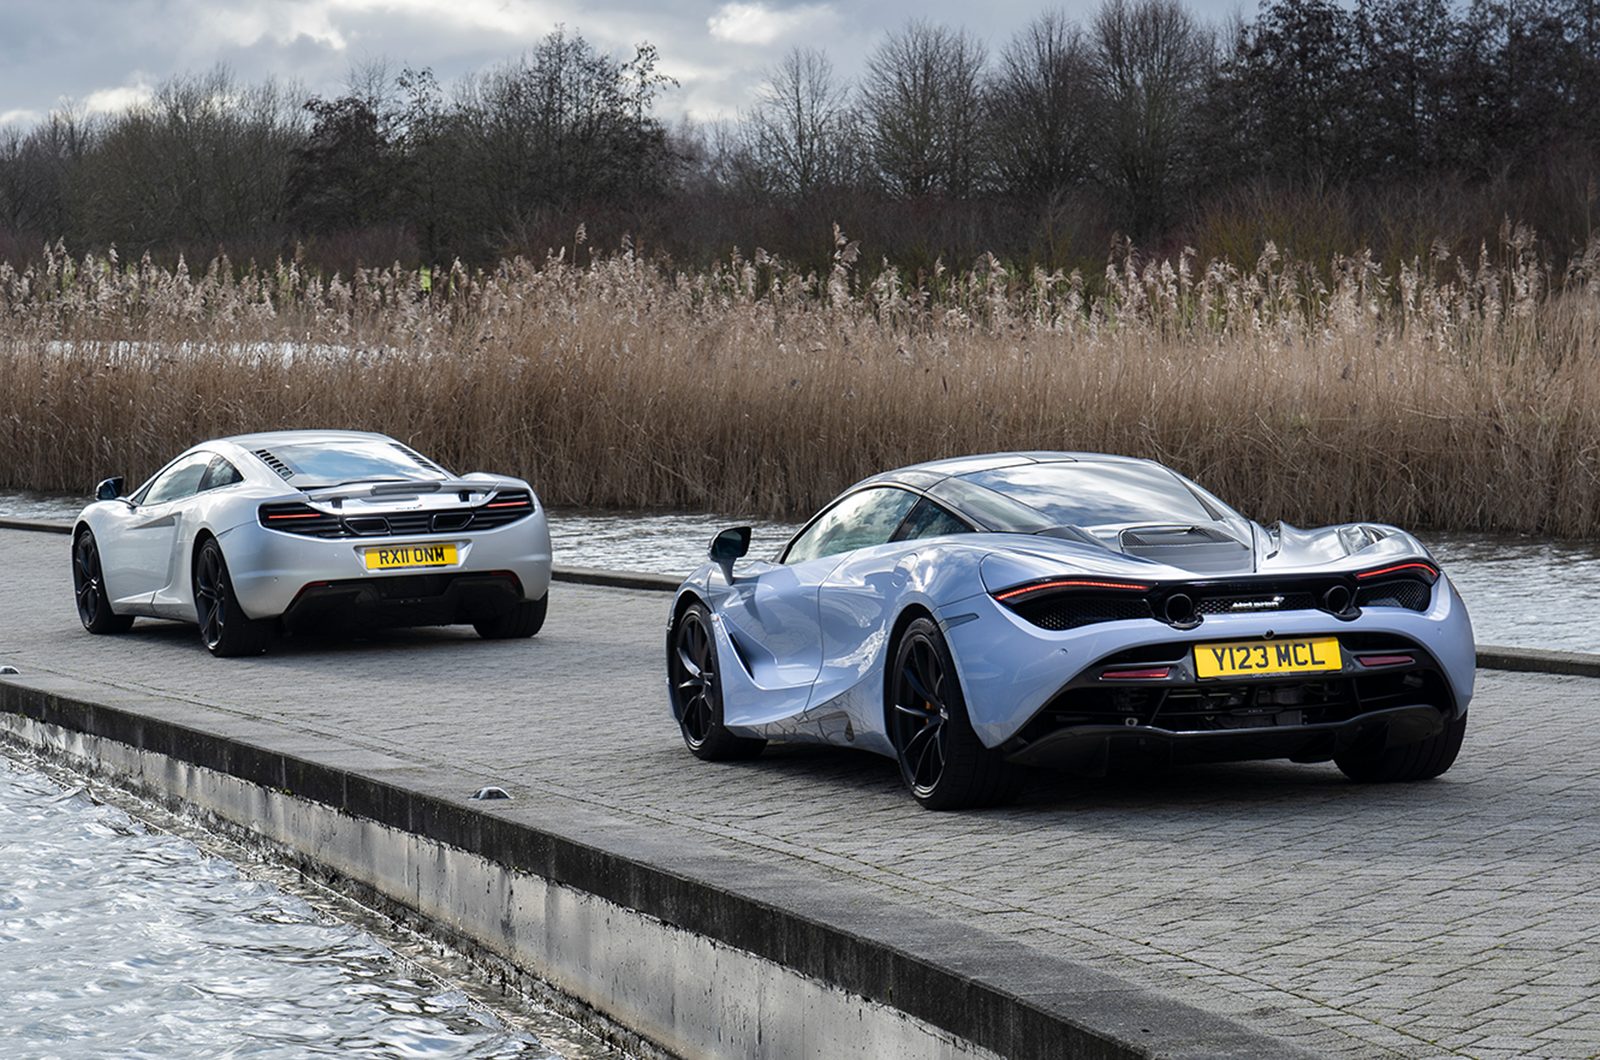 Classic & Sports Car – 50 McLaren supercars head to London Concours